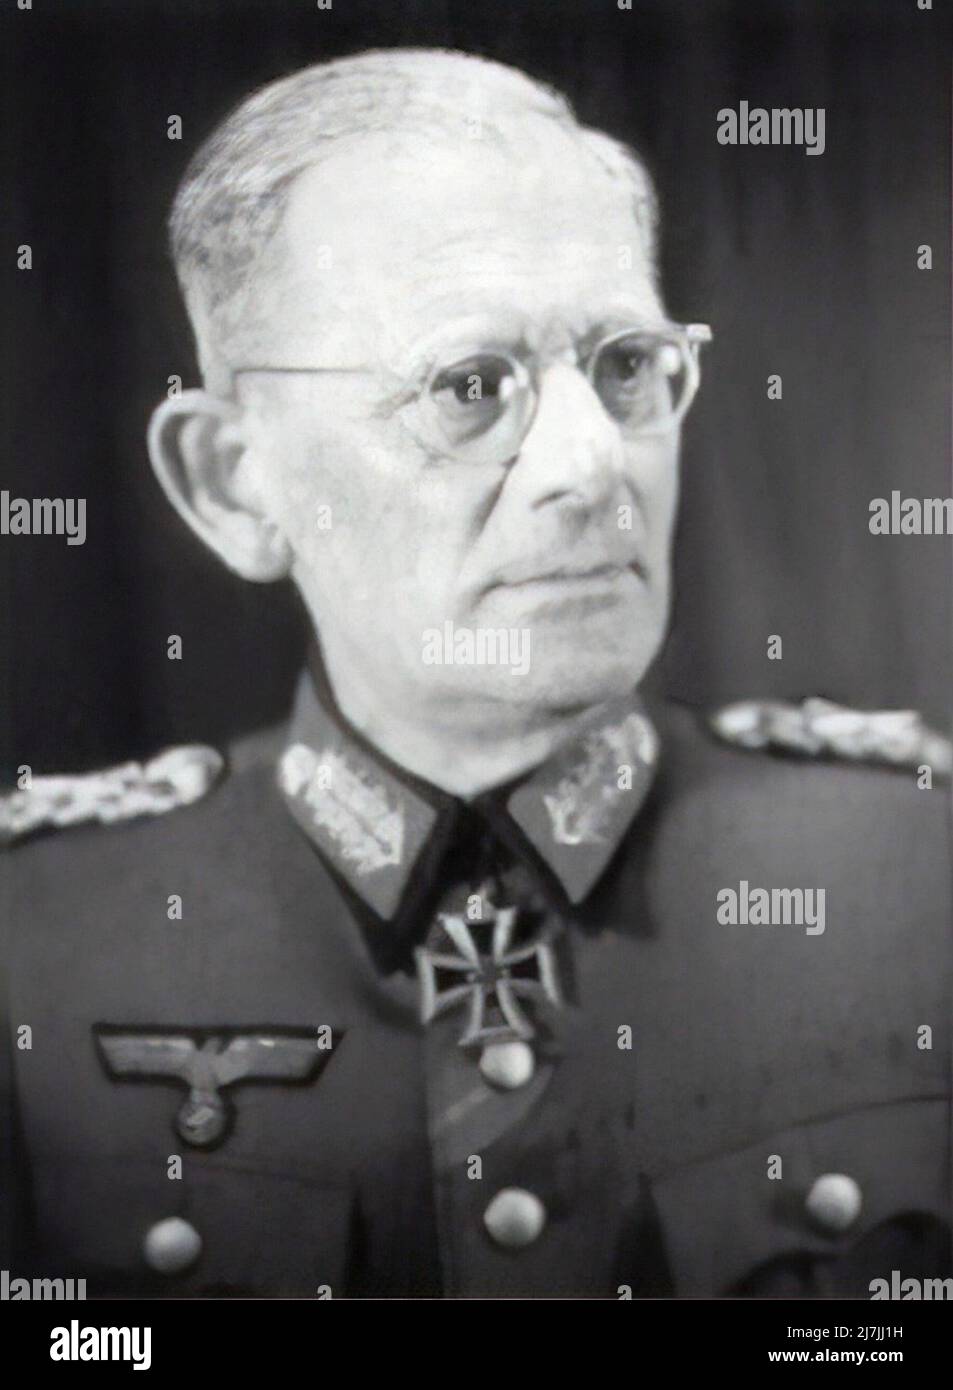 The splendidly named Maximilian Maria Joseph Karl Gabriel Lamoral Reichsfreiherr von und zu Weichs an der Glon (also known as the less imposing Maximilan von Weichs) was a field marshal in the Wehrmacht of Nazi Germany during World War II. During Case Blue, the German offensive in southern Russia, he was commander of Army Group B. In 1944, Weichs commanded Army Group F in the Balkans overseeing the German retreat from Greece and most of Yugoslavia. Stock Photo